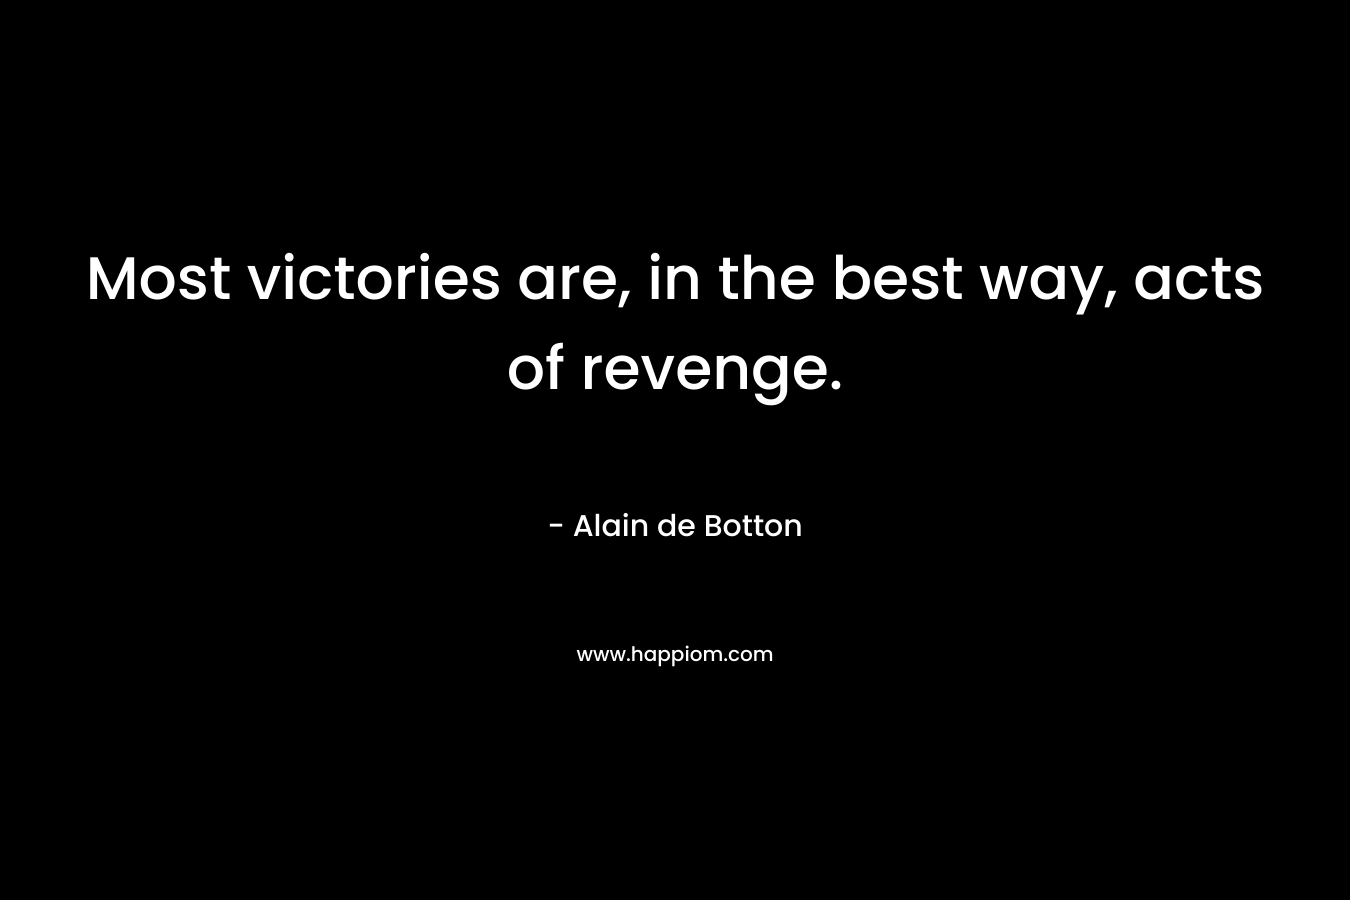 Most victories are, in the best way, acts of revenge. – Alain de Botton